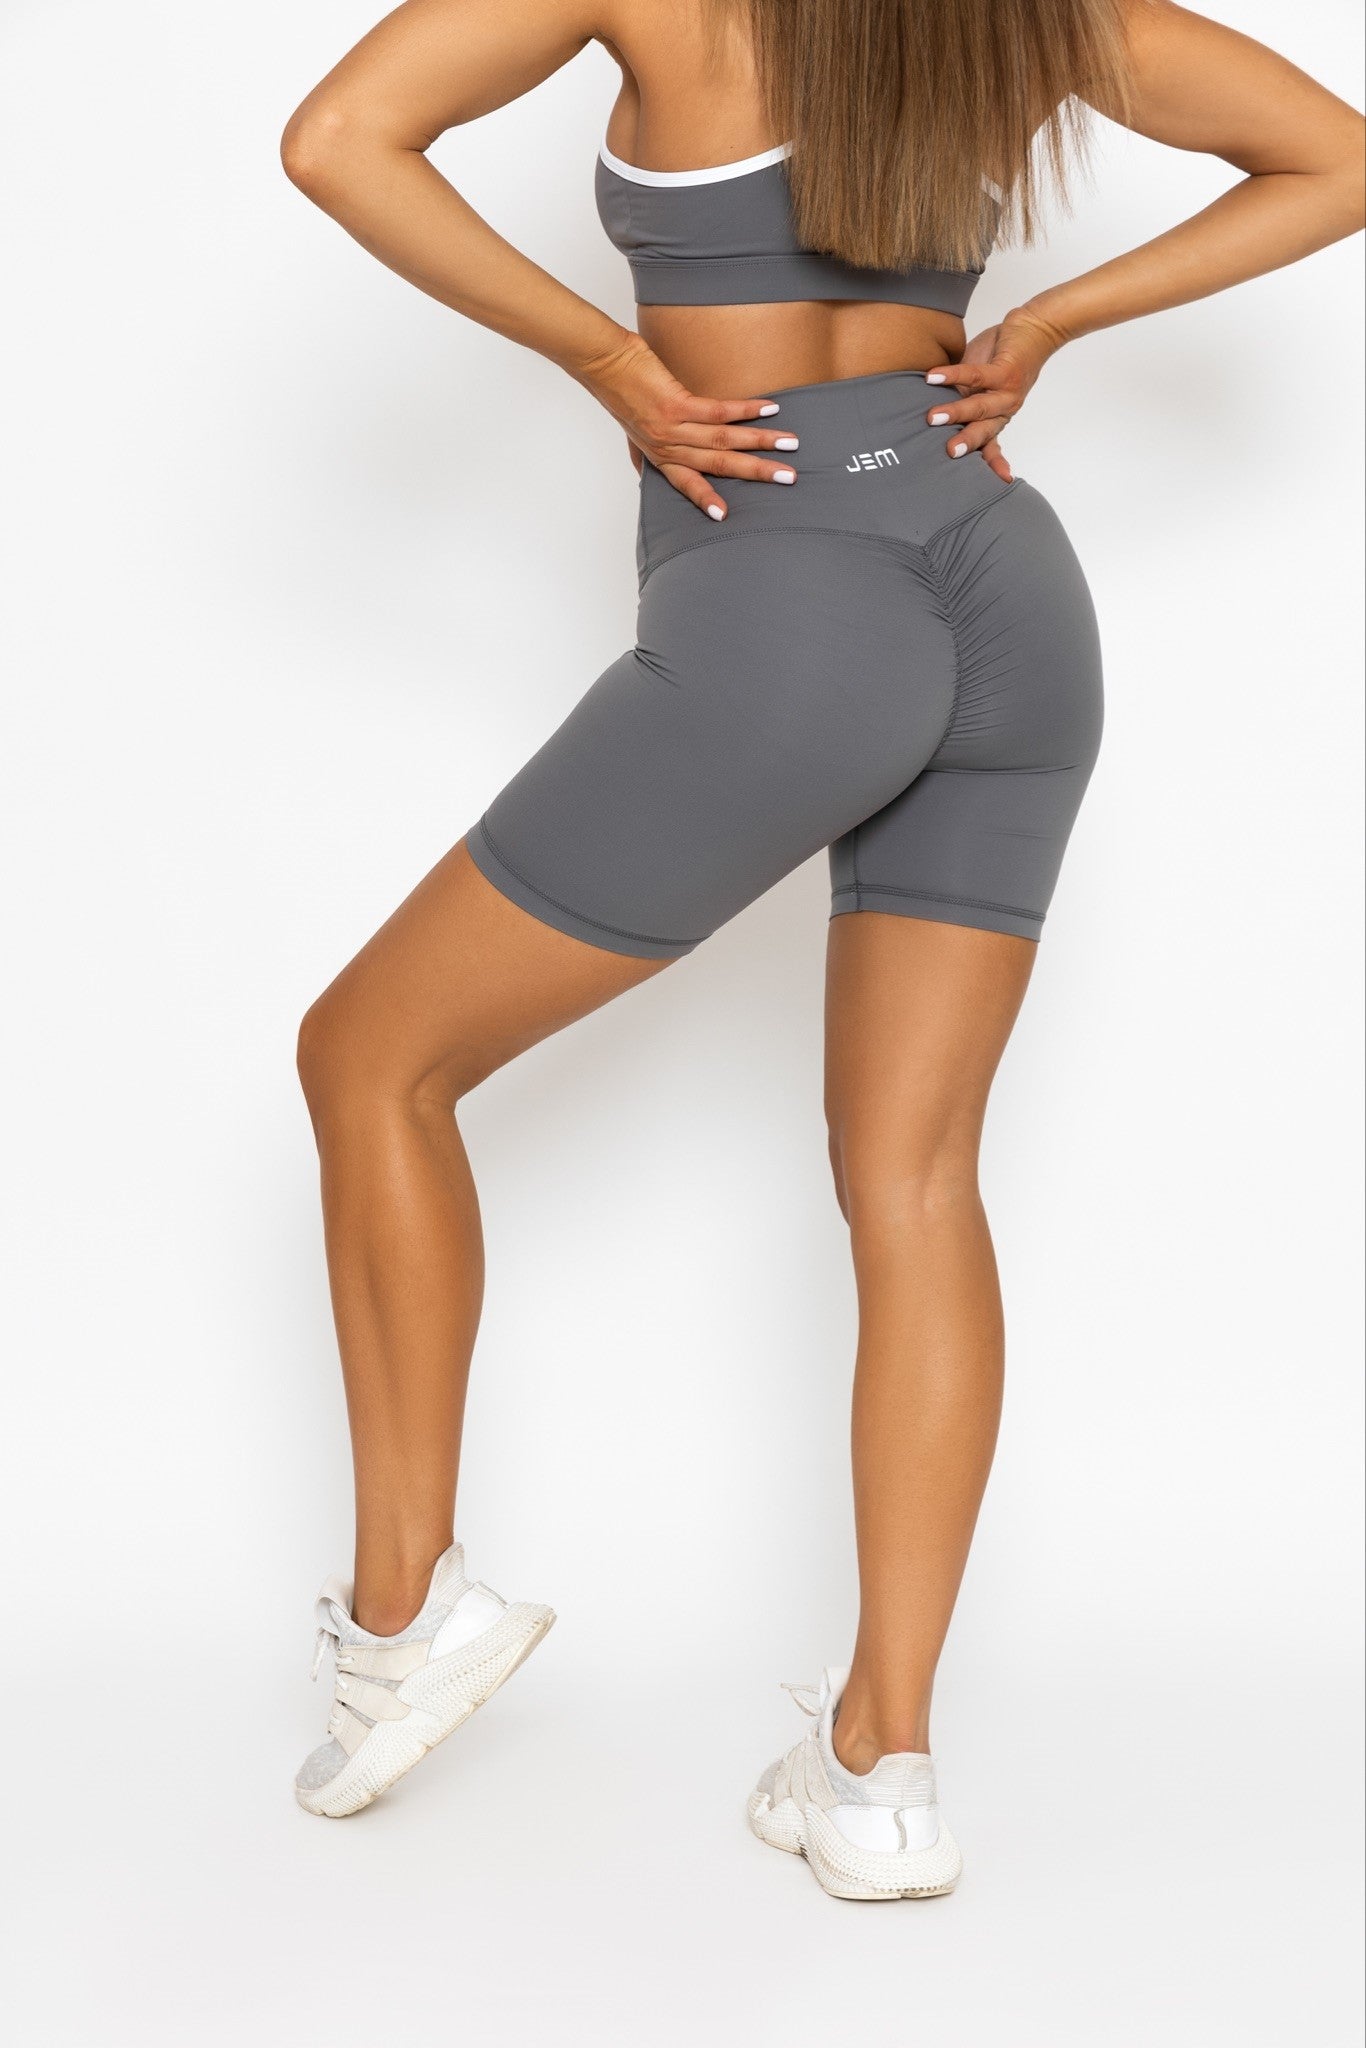 Charcoal scrunch shorts - Buy now here at House Of Peach ®